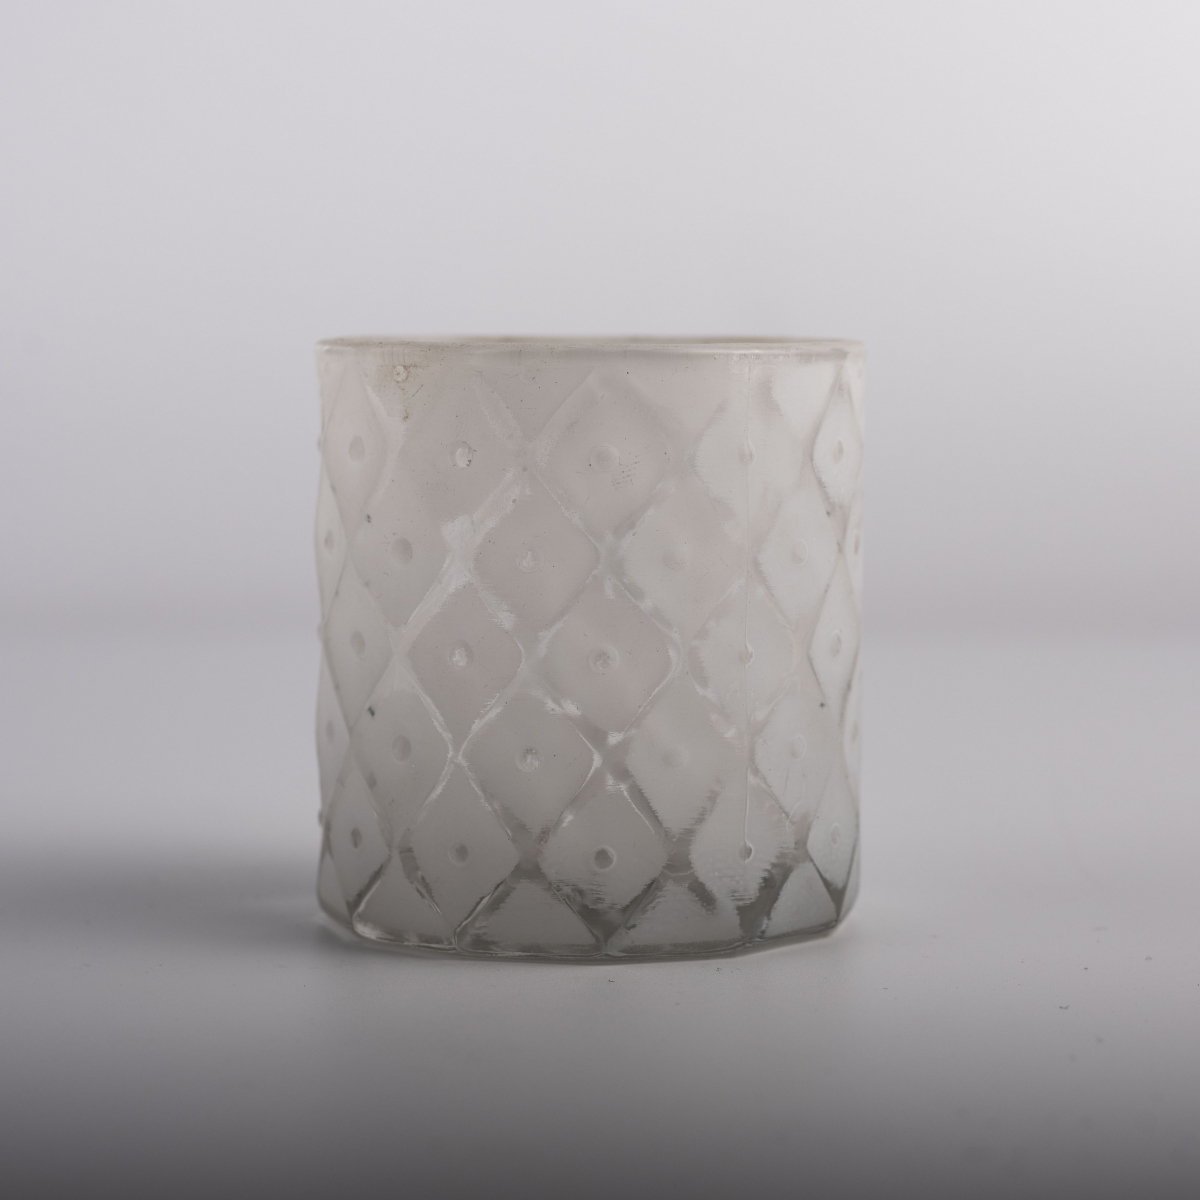 Candle Holder ：Ceramic White  , Diamond Lattice , Polished Glass Jar  , Home Sweet Home , China Factory Price-HOWCANDLE-Candles,Scented Candles,Aromatherapy Candles,Soy Candles,Vegan Candles,Jar Candles,Pillar Candles,Candle Gift Sets,Essential Oils,Reed Diffuser,Candle Holder,